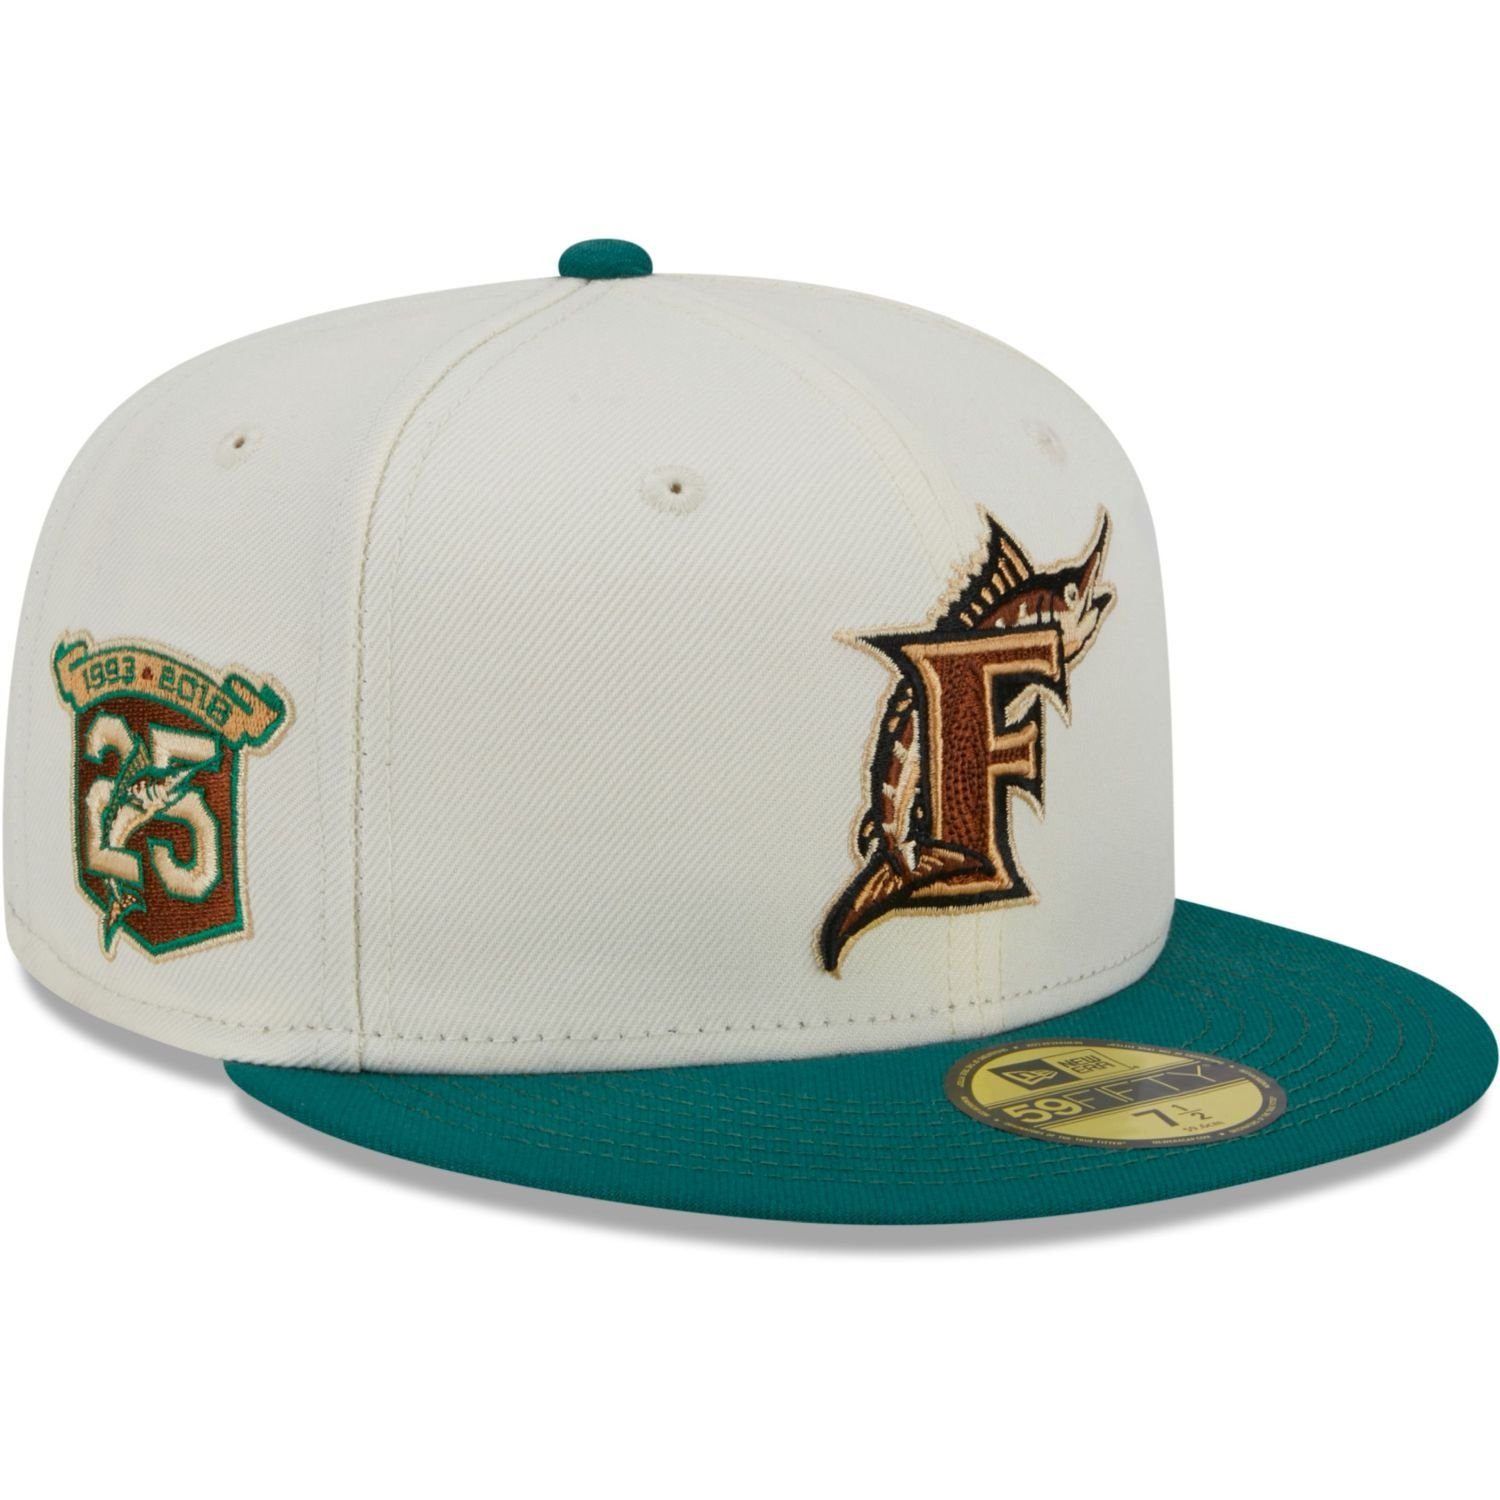 New Era Fitted Cap 59Fifty CAMP Florida Marlins